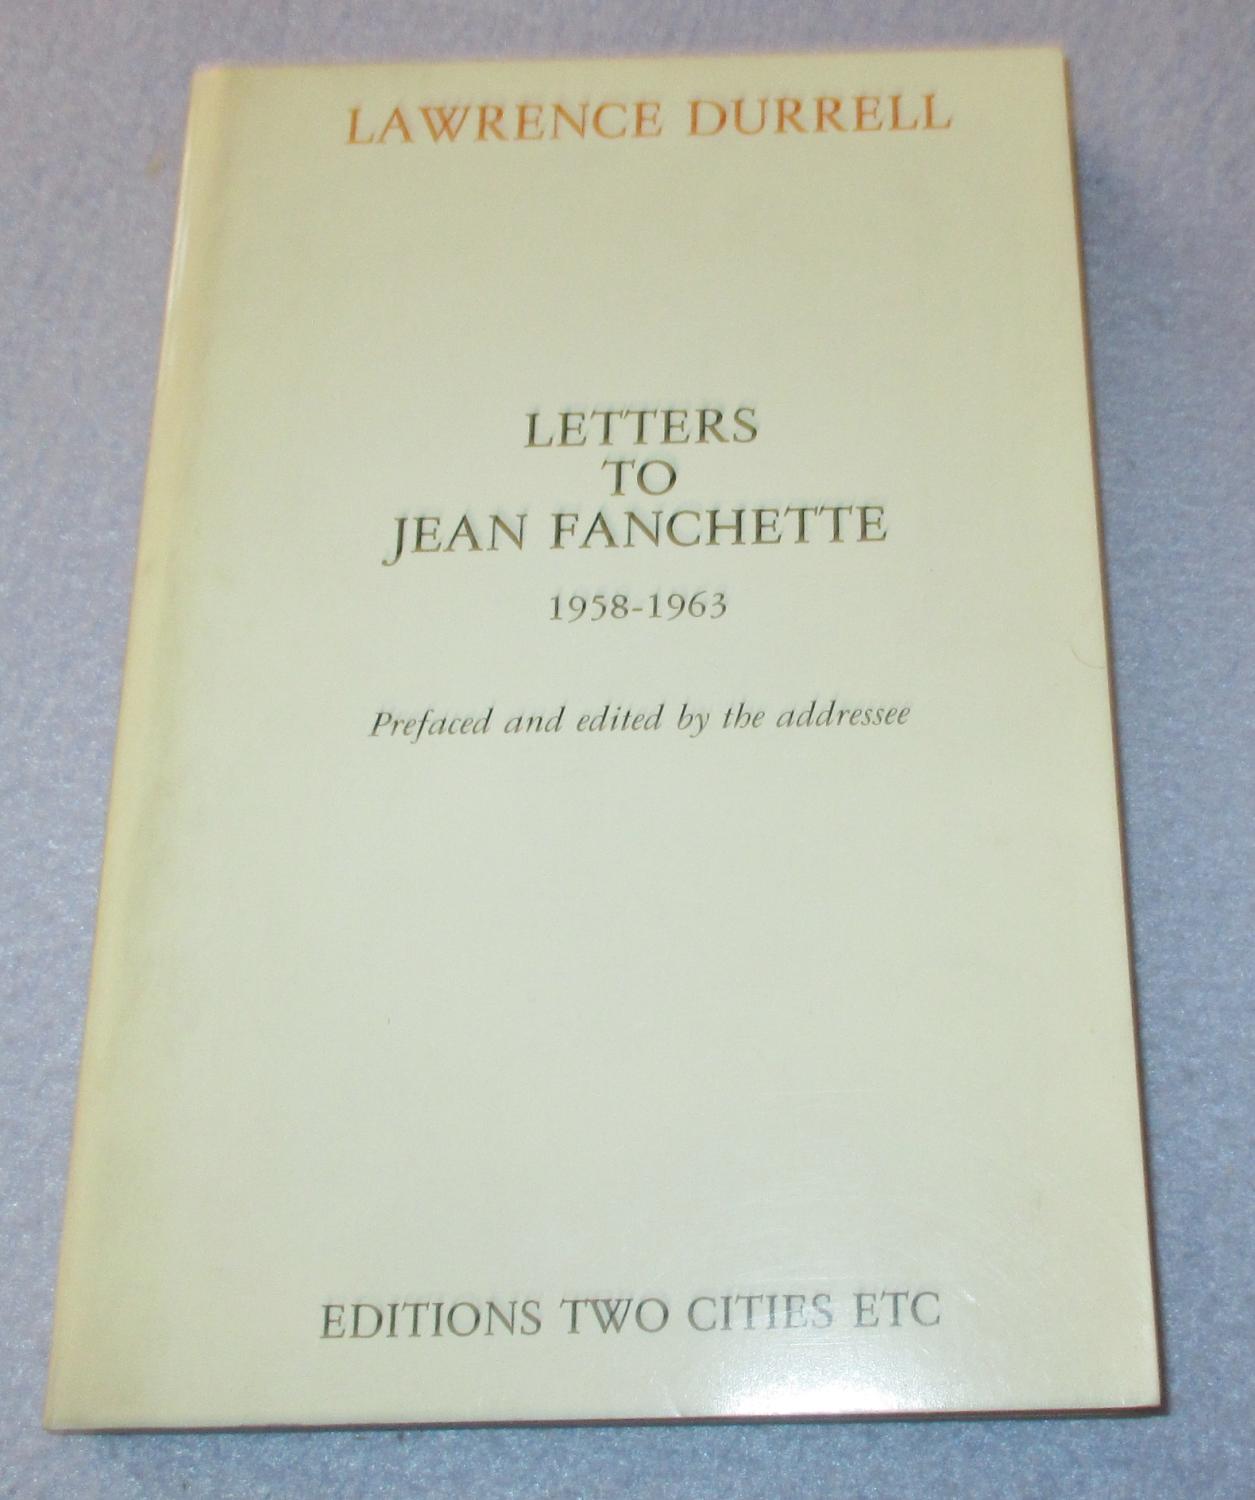 LETTERS TO JEAN FANCHETTE, 1958-1963 (Signed copy) - Lawrence Durrell